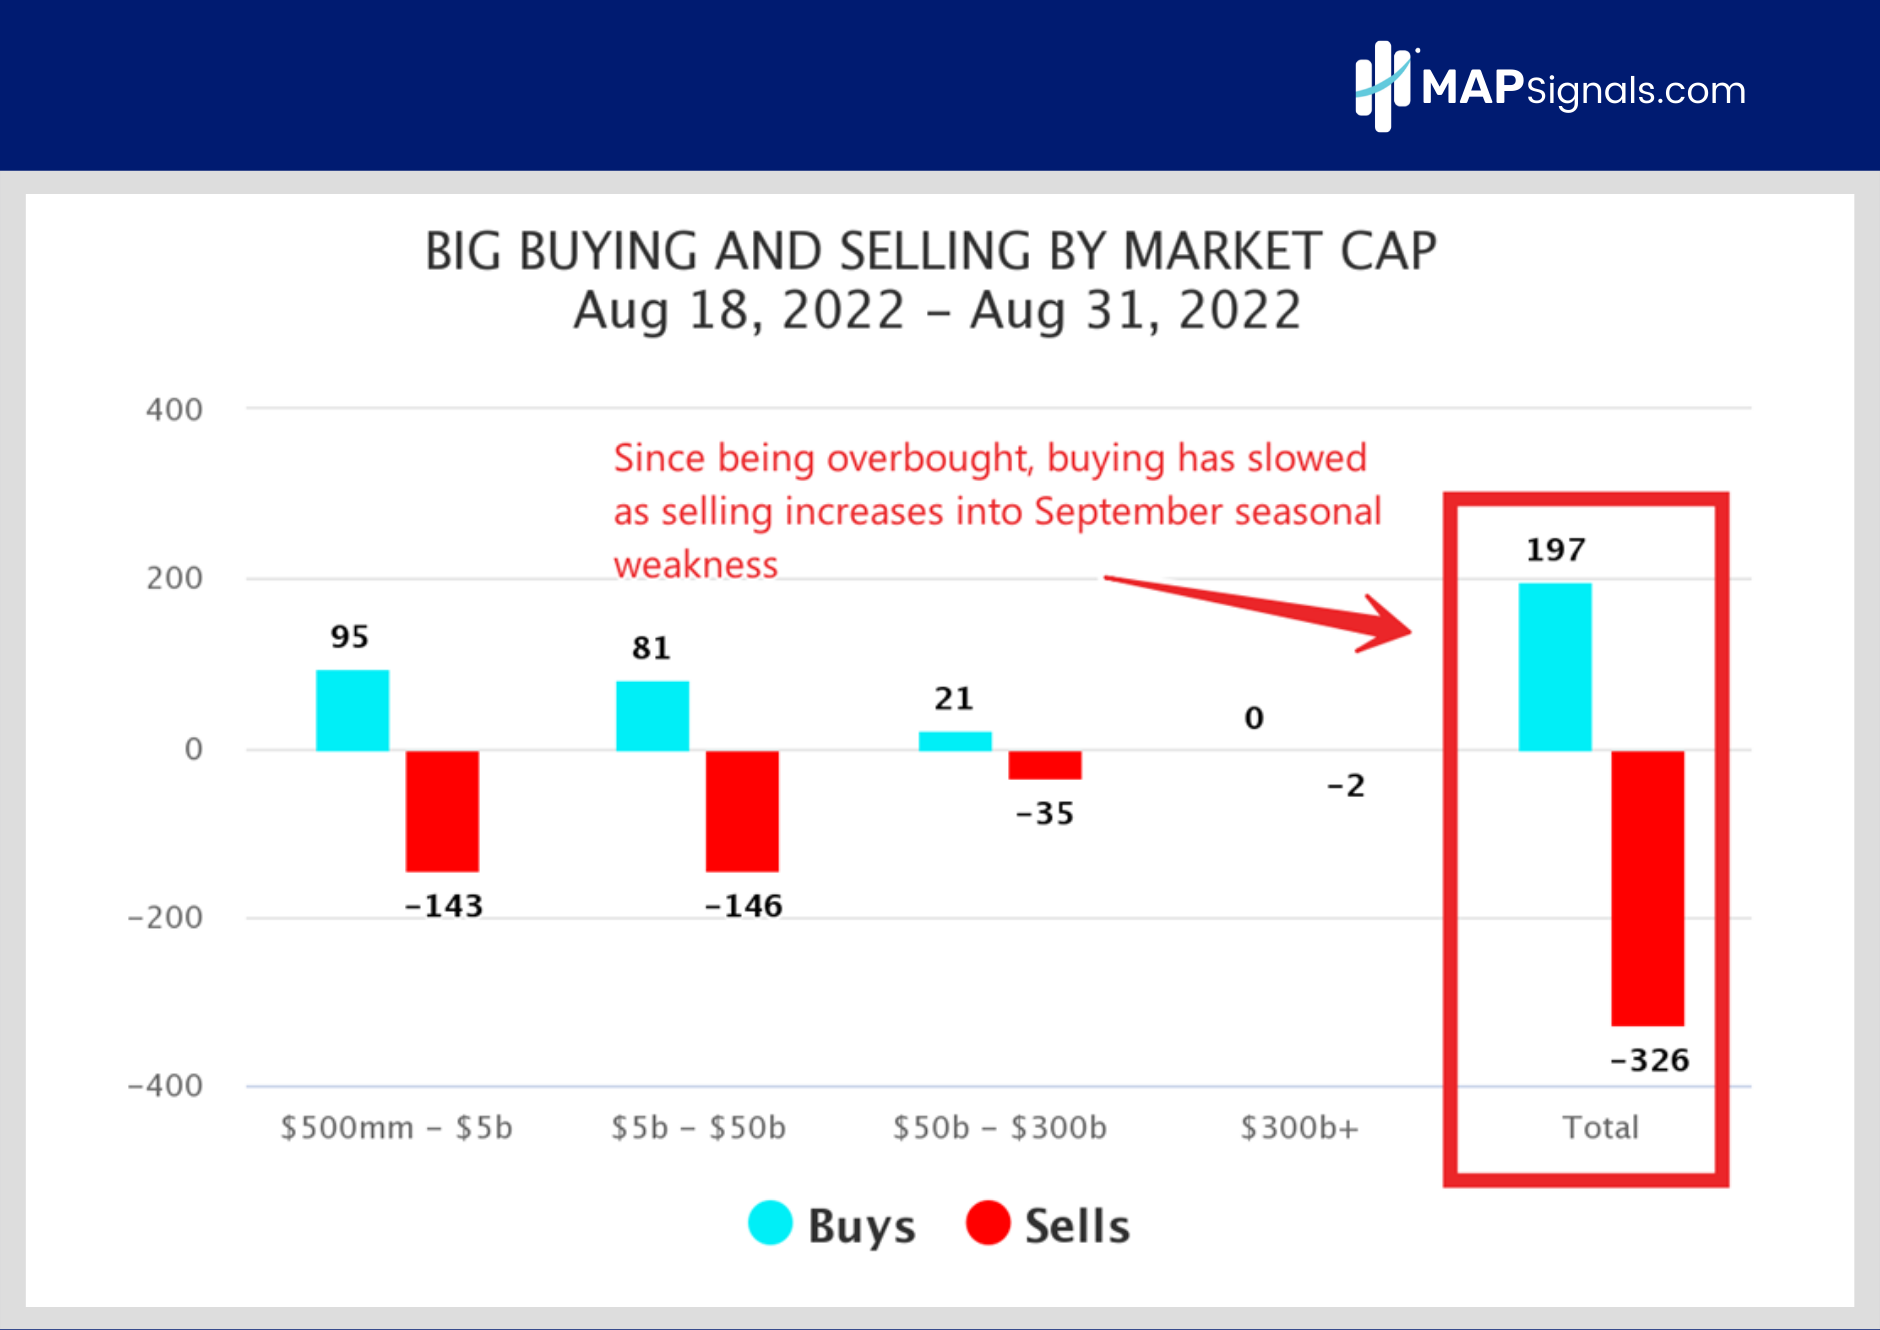 Big Money Buying and Selling by Market Cap Aug 18 - 31 | 2022